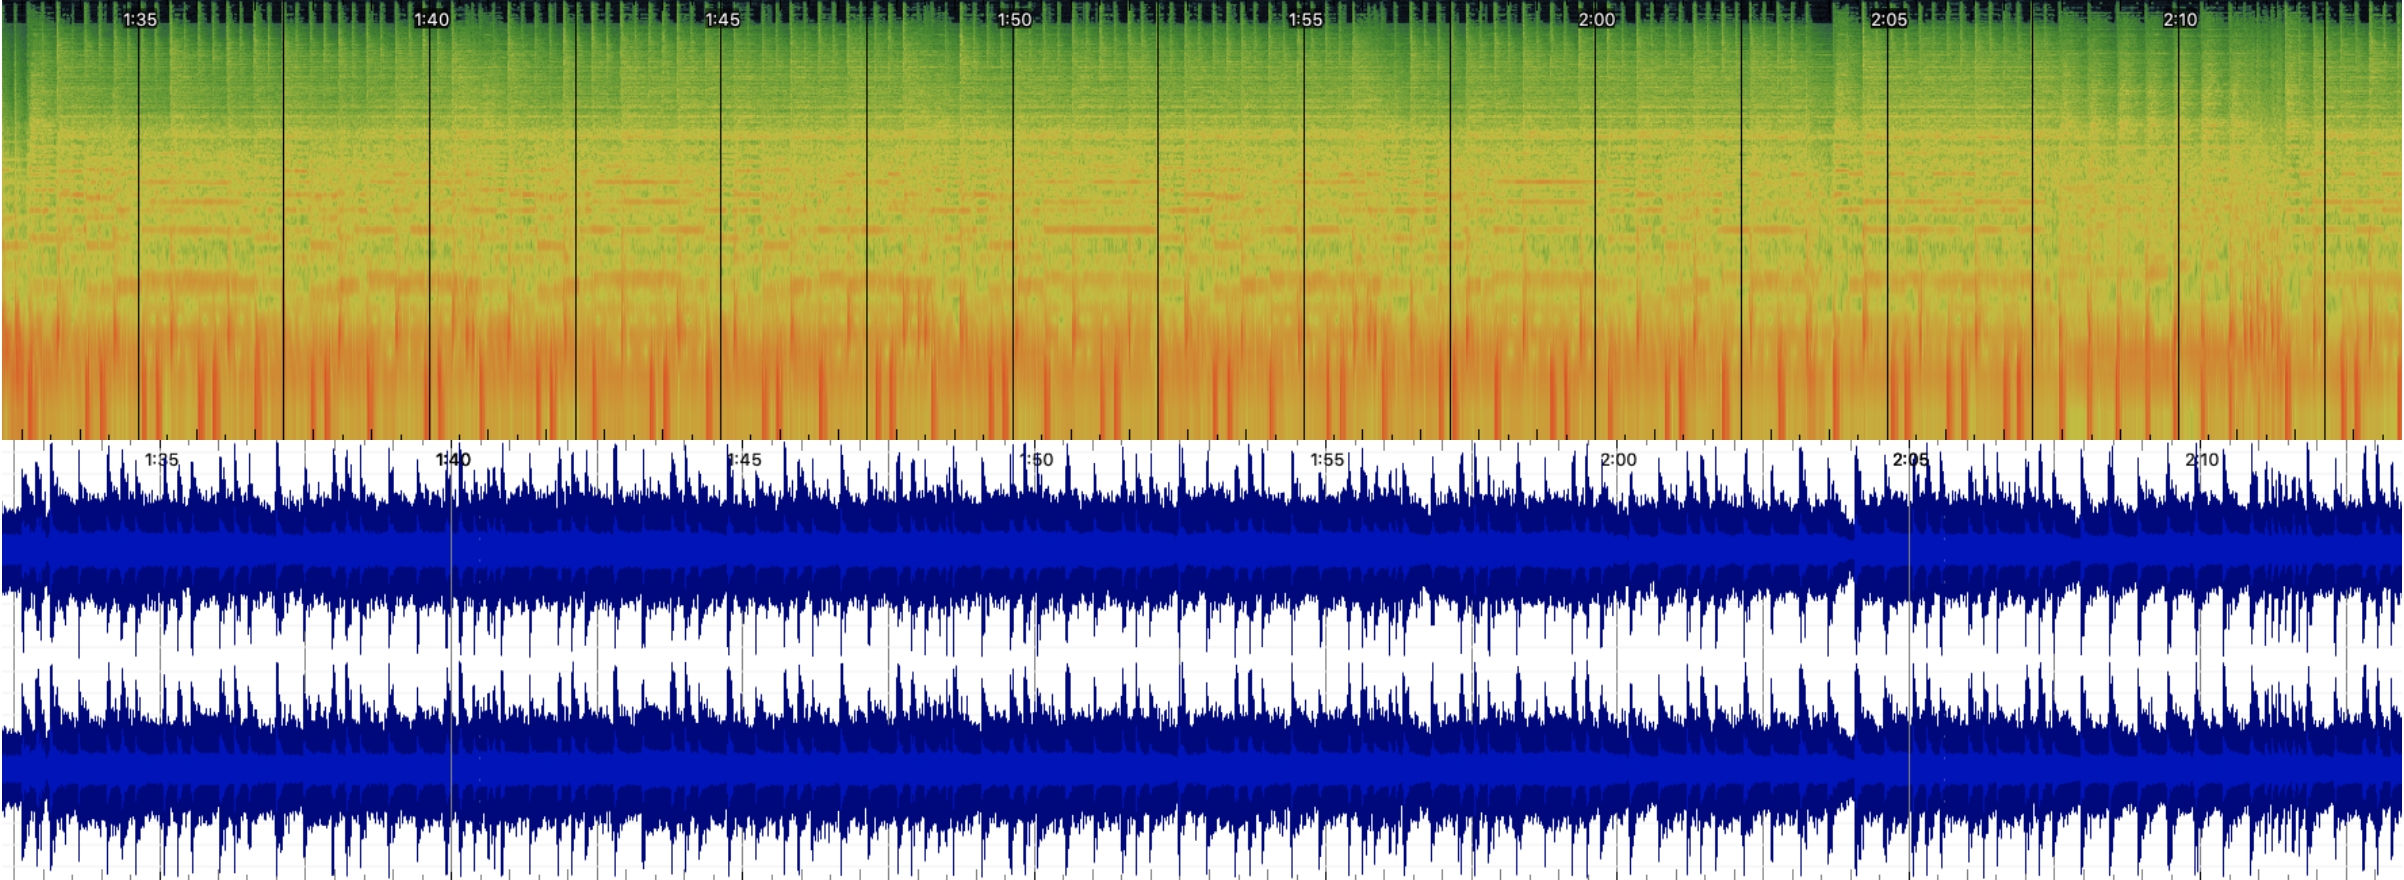 Spectrogram and waveform preview for Malala by The Inventors